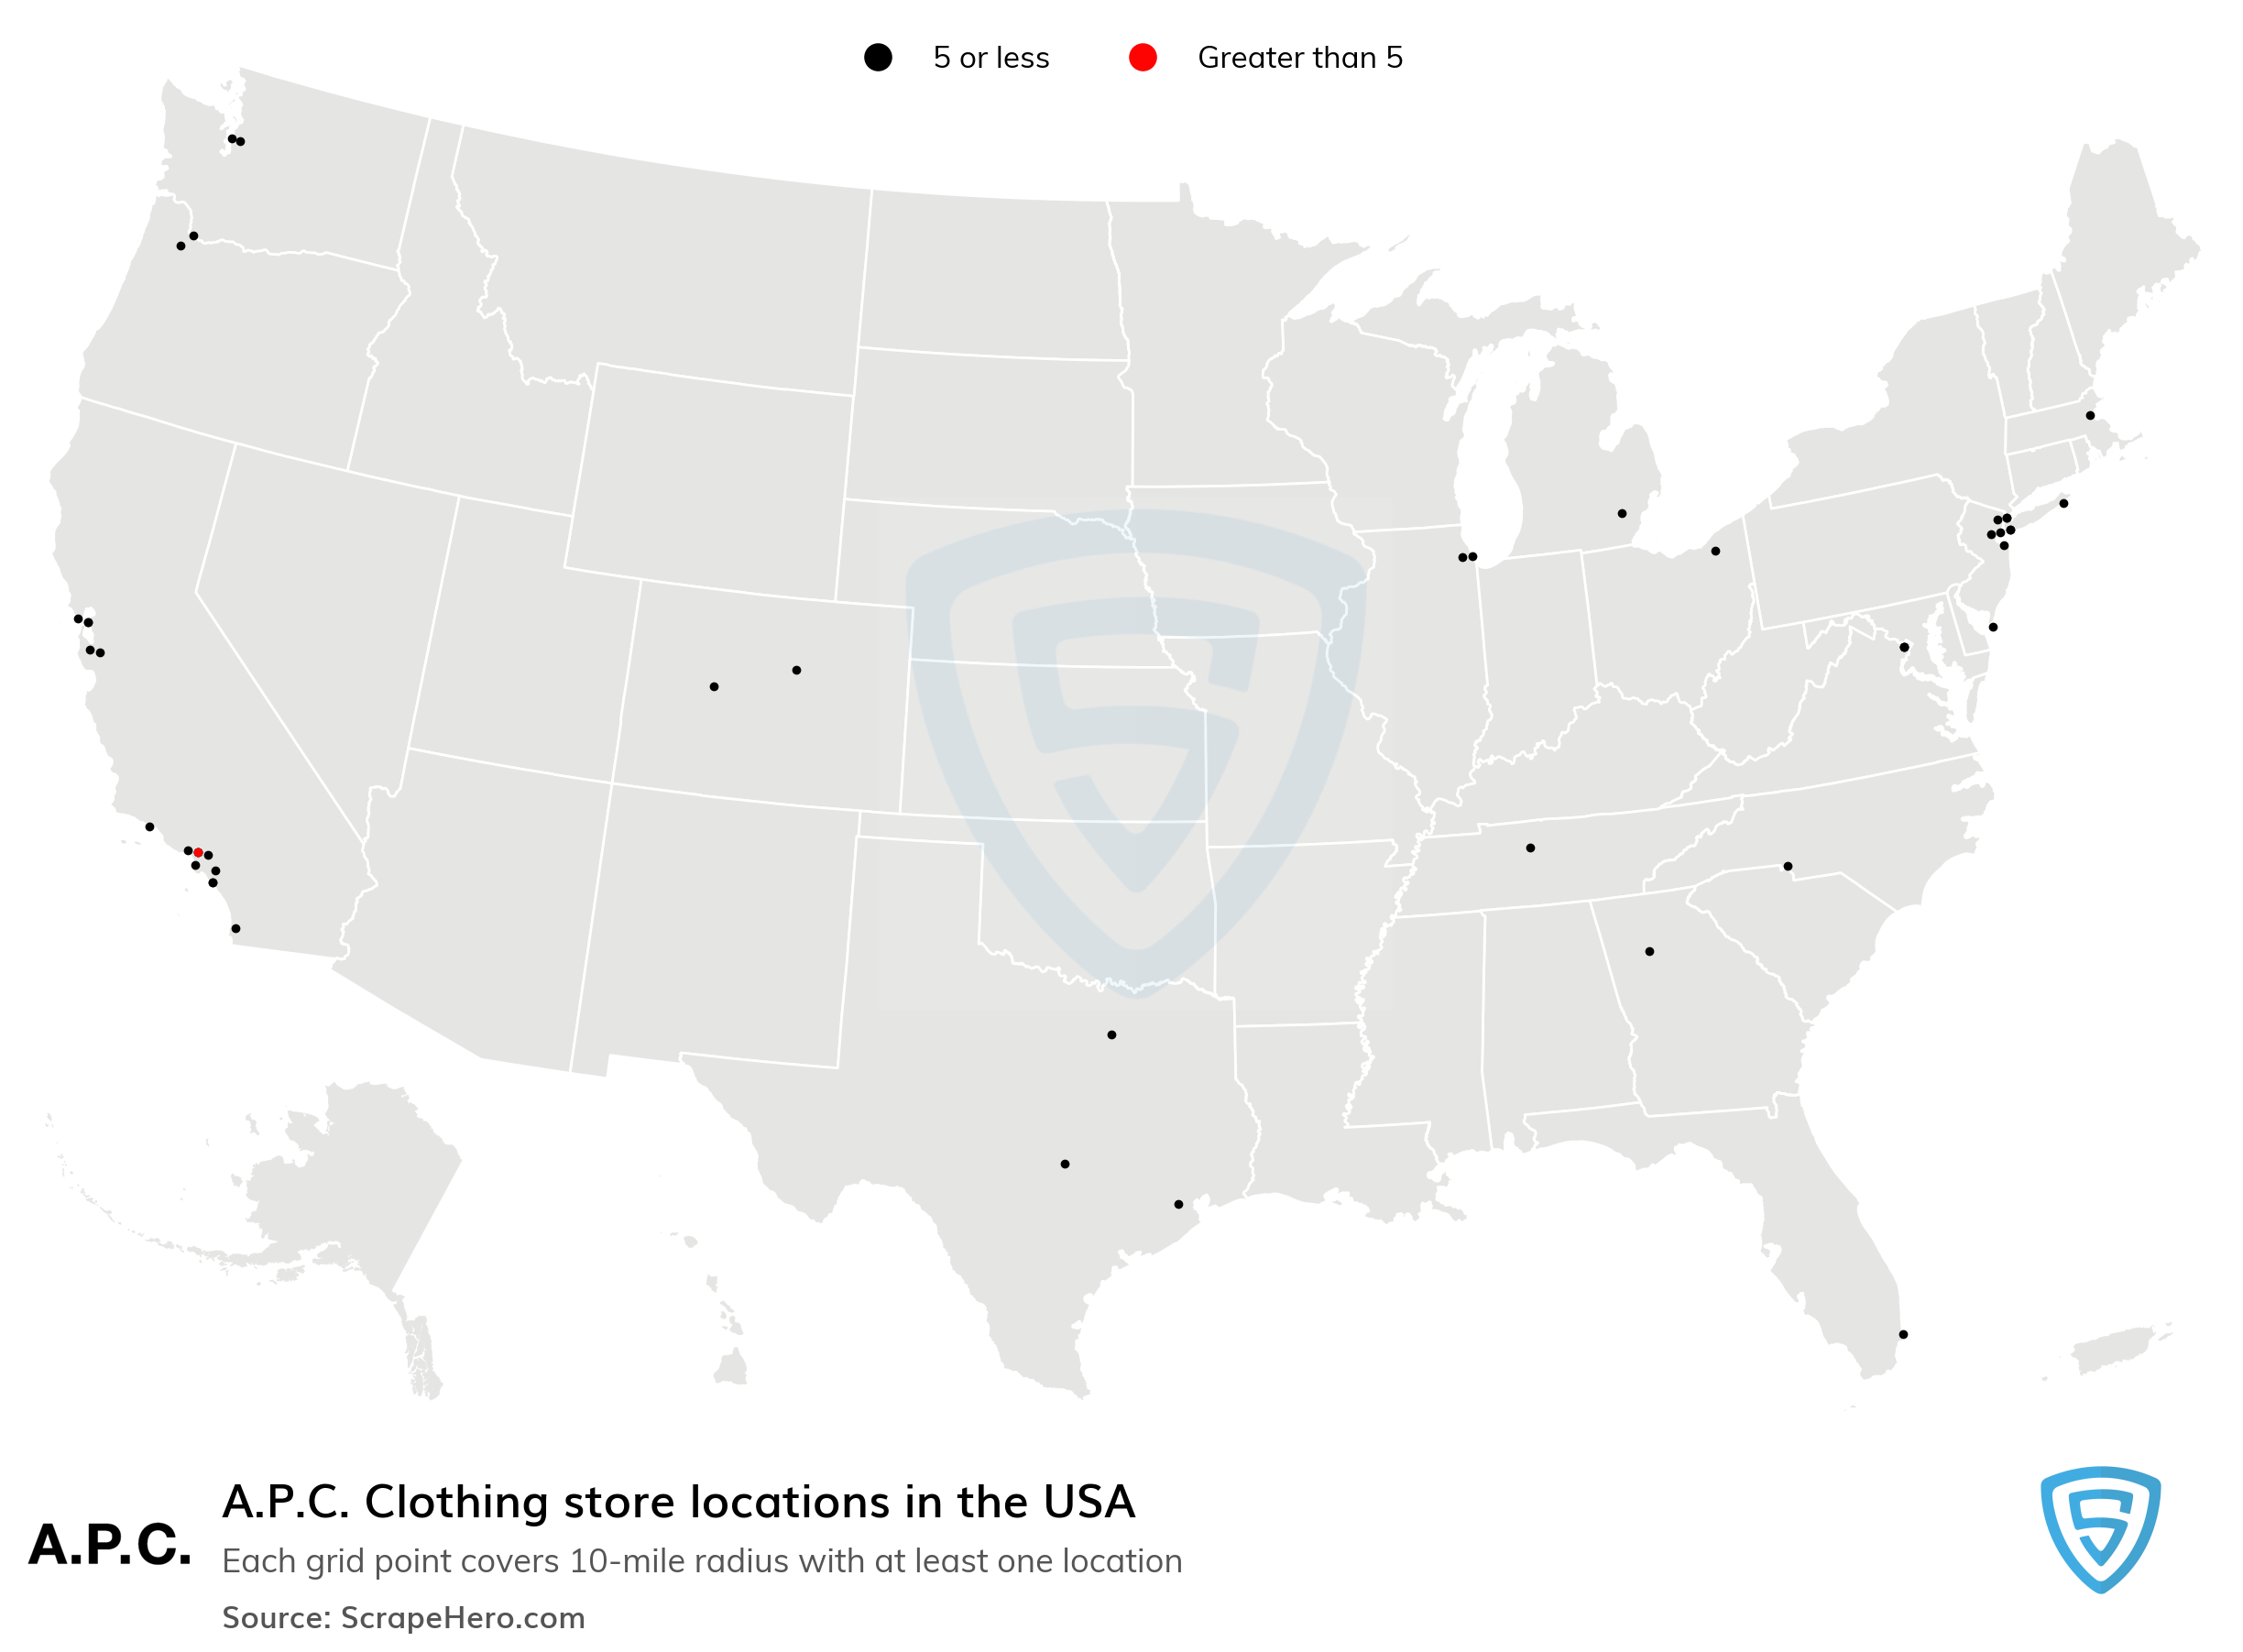 Number of A.P.C. Clothing locations in the USA in 2024 | ScrapeHero